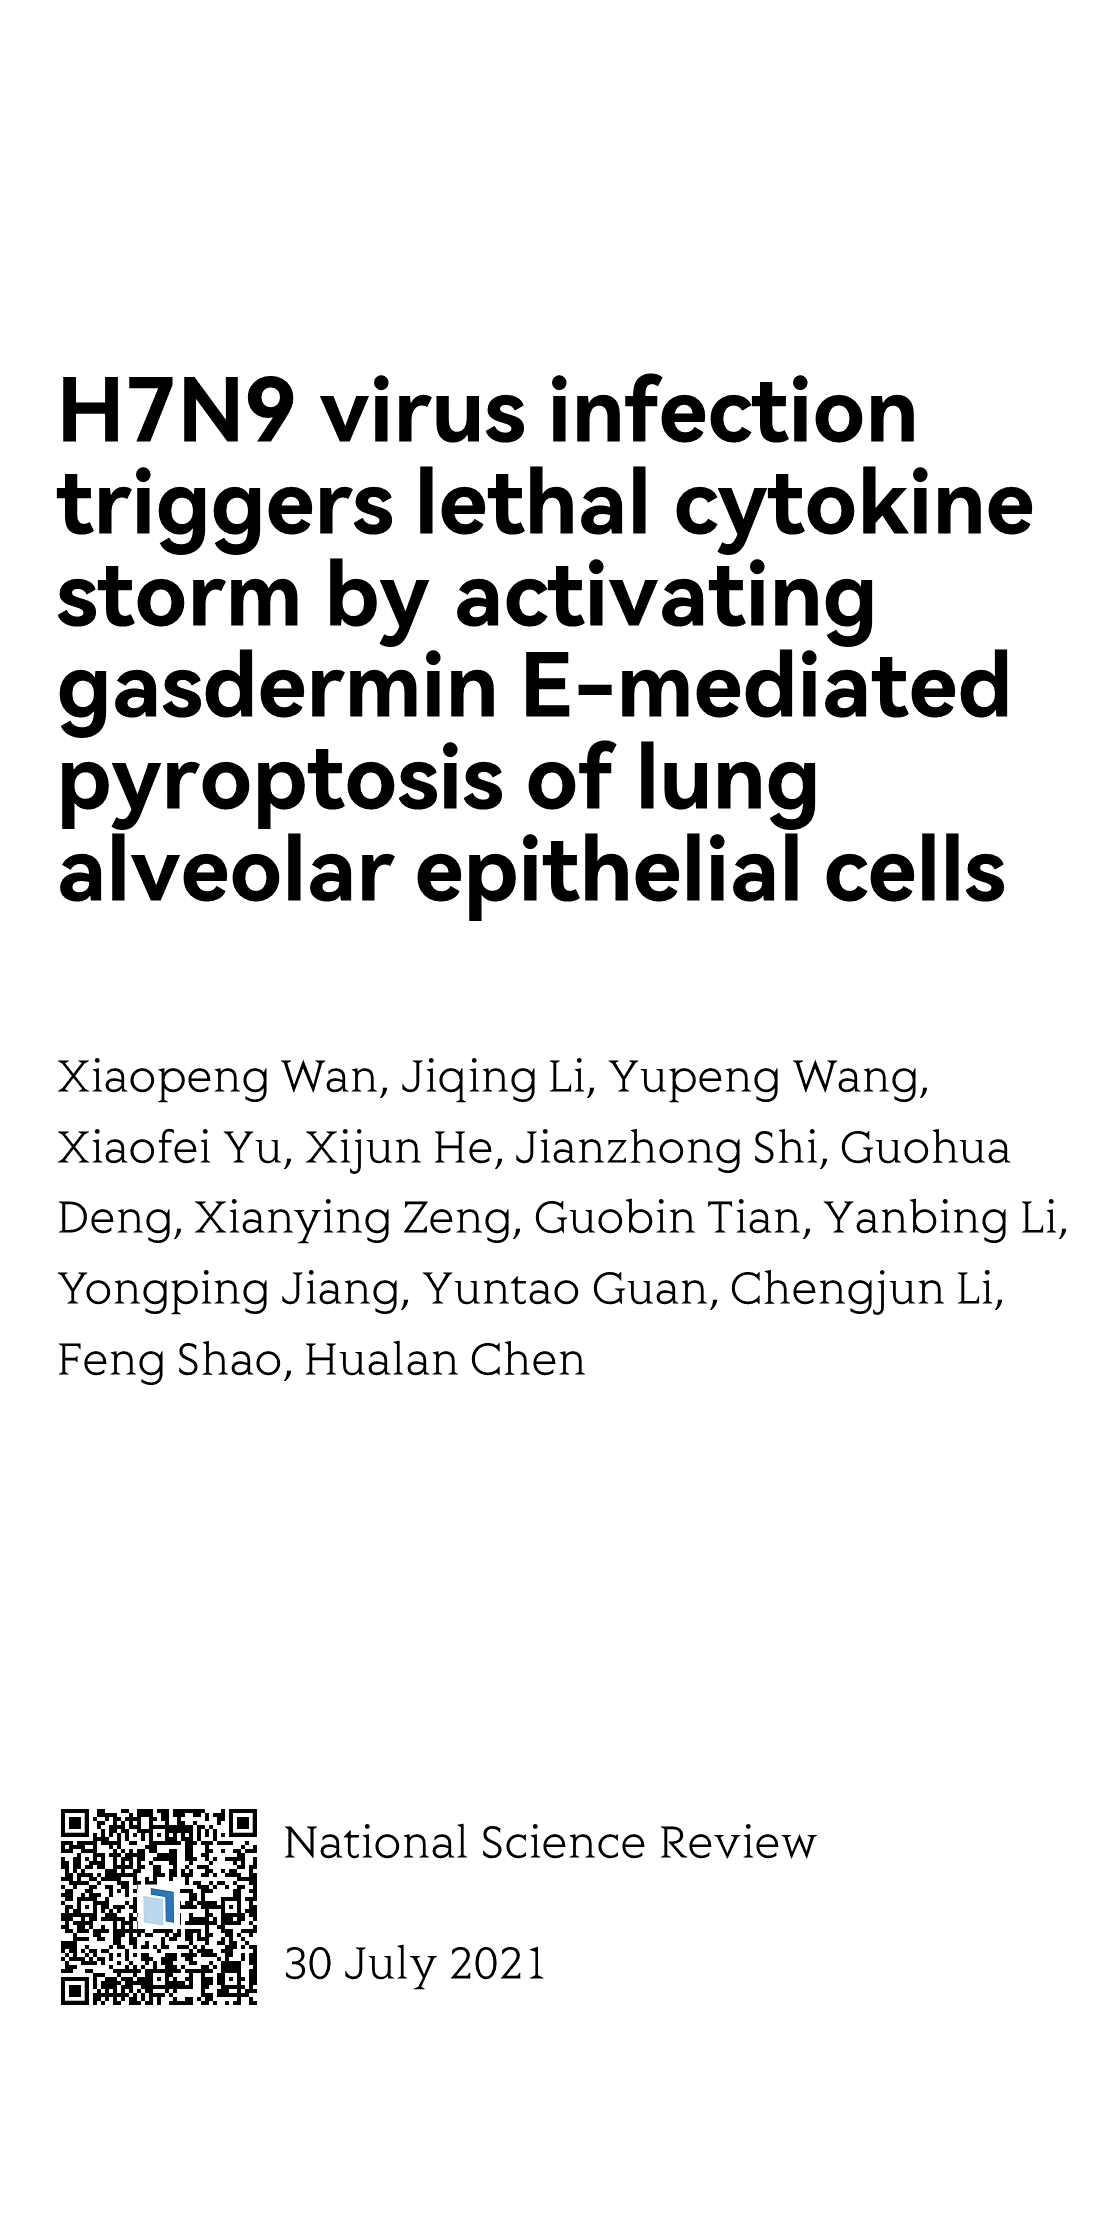 H7N9 virus infection triggers lethal cytokine storm by activating gasdermin E-mediated pyroptosis of lung alveolar epithelial cells_1